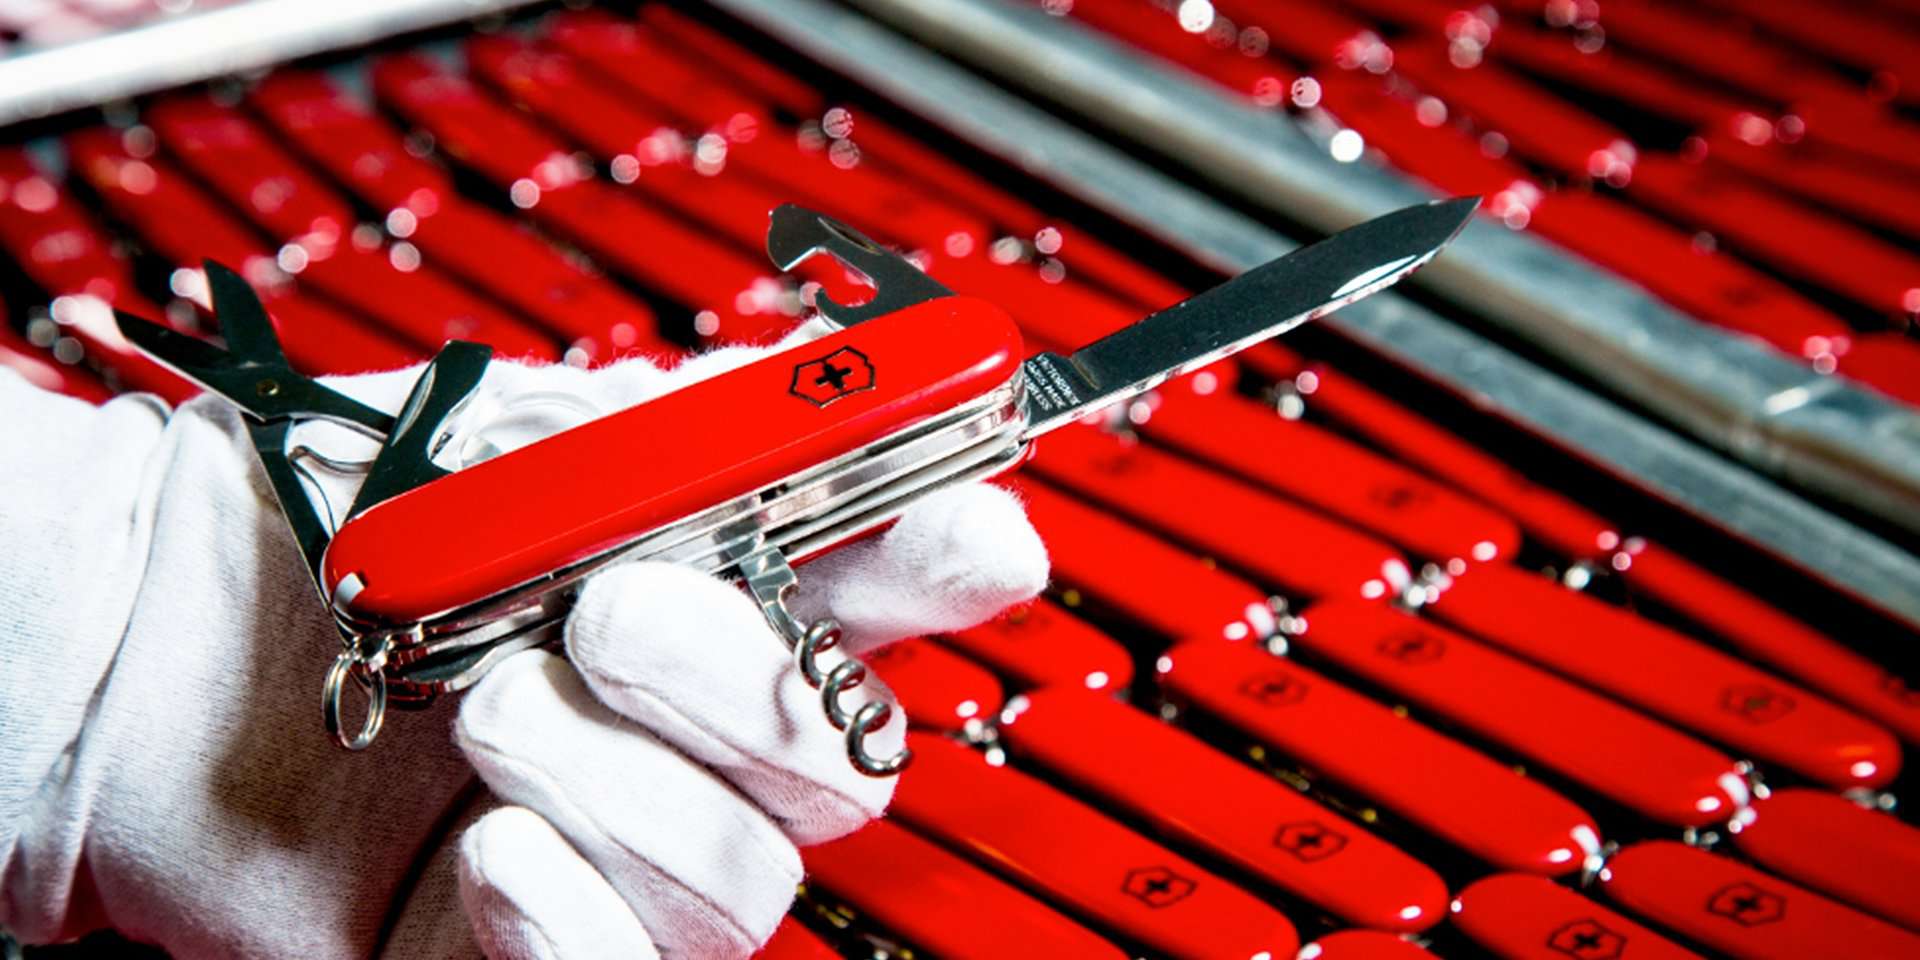 Taboola Ad Example 39784 - How The Swiss Army Knife Factory Makes 45,000 Pocket Knives Per Day